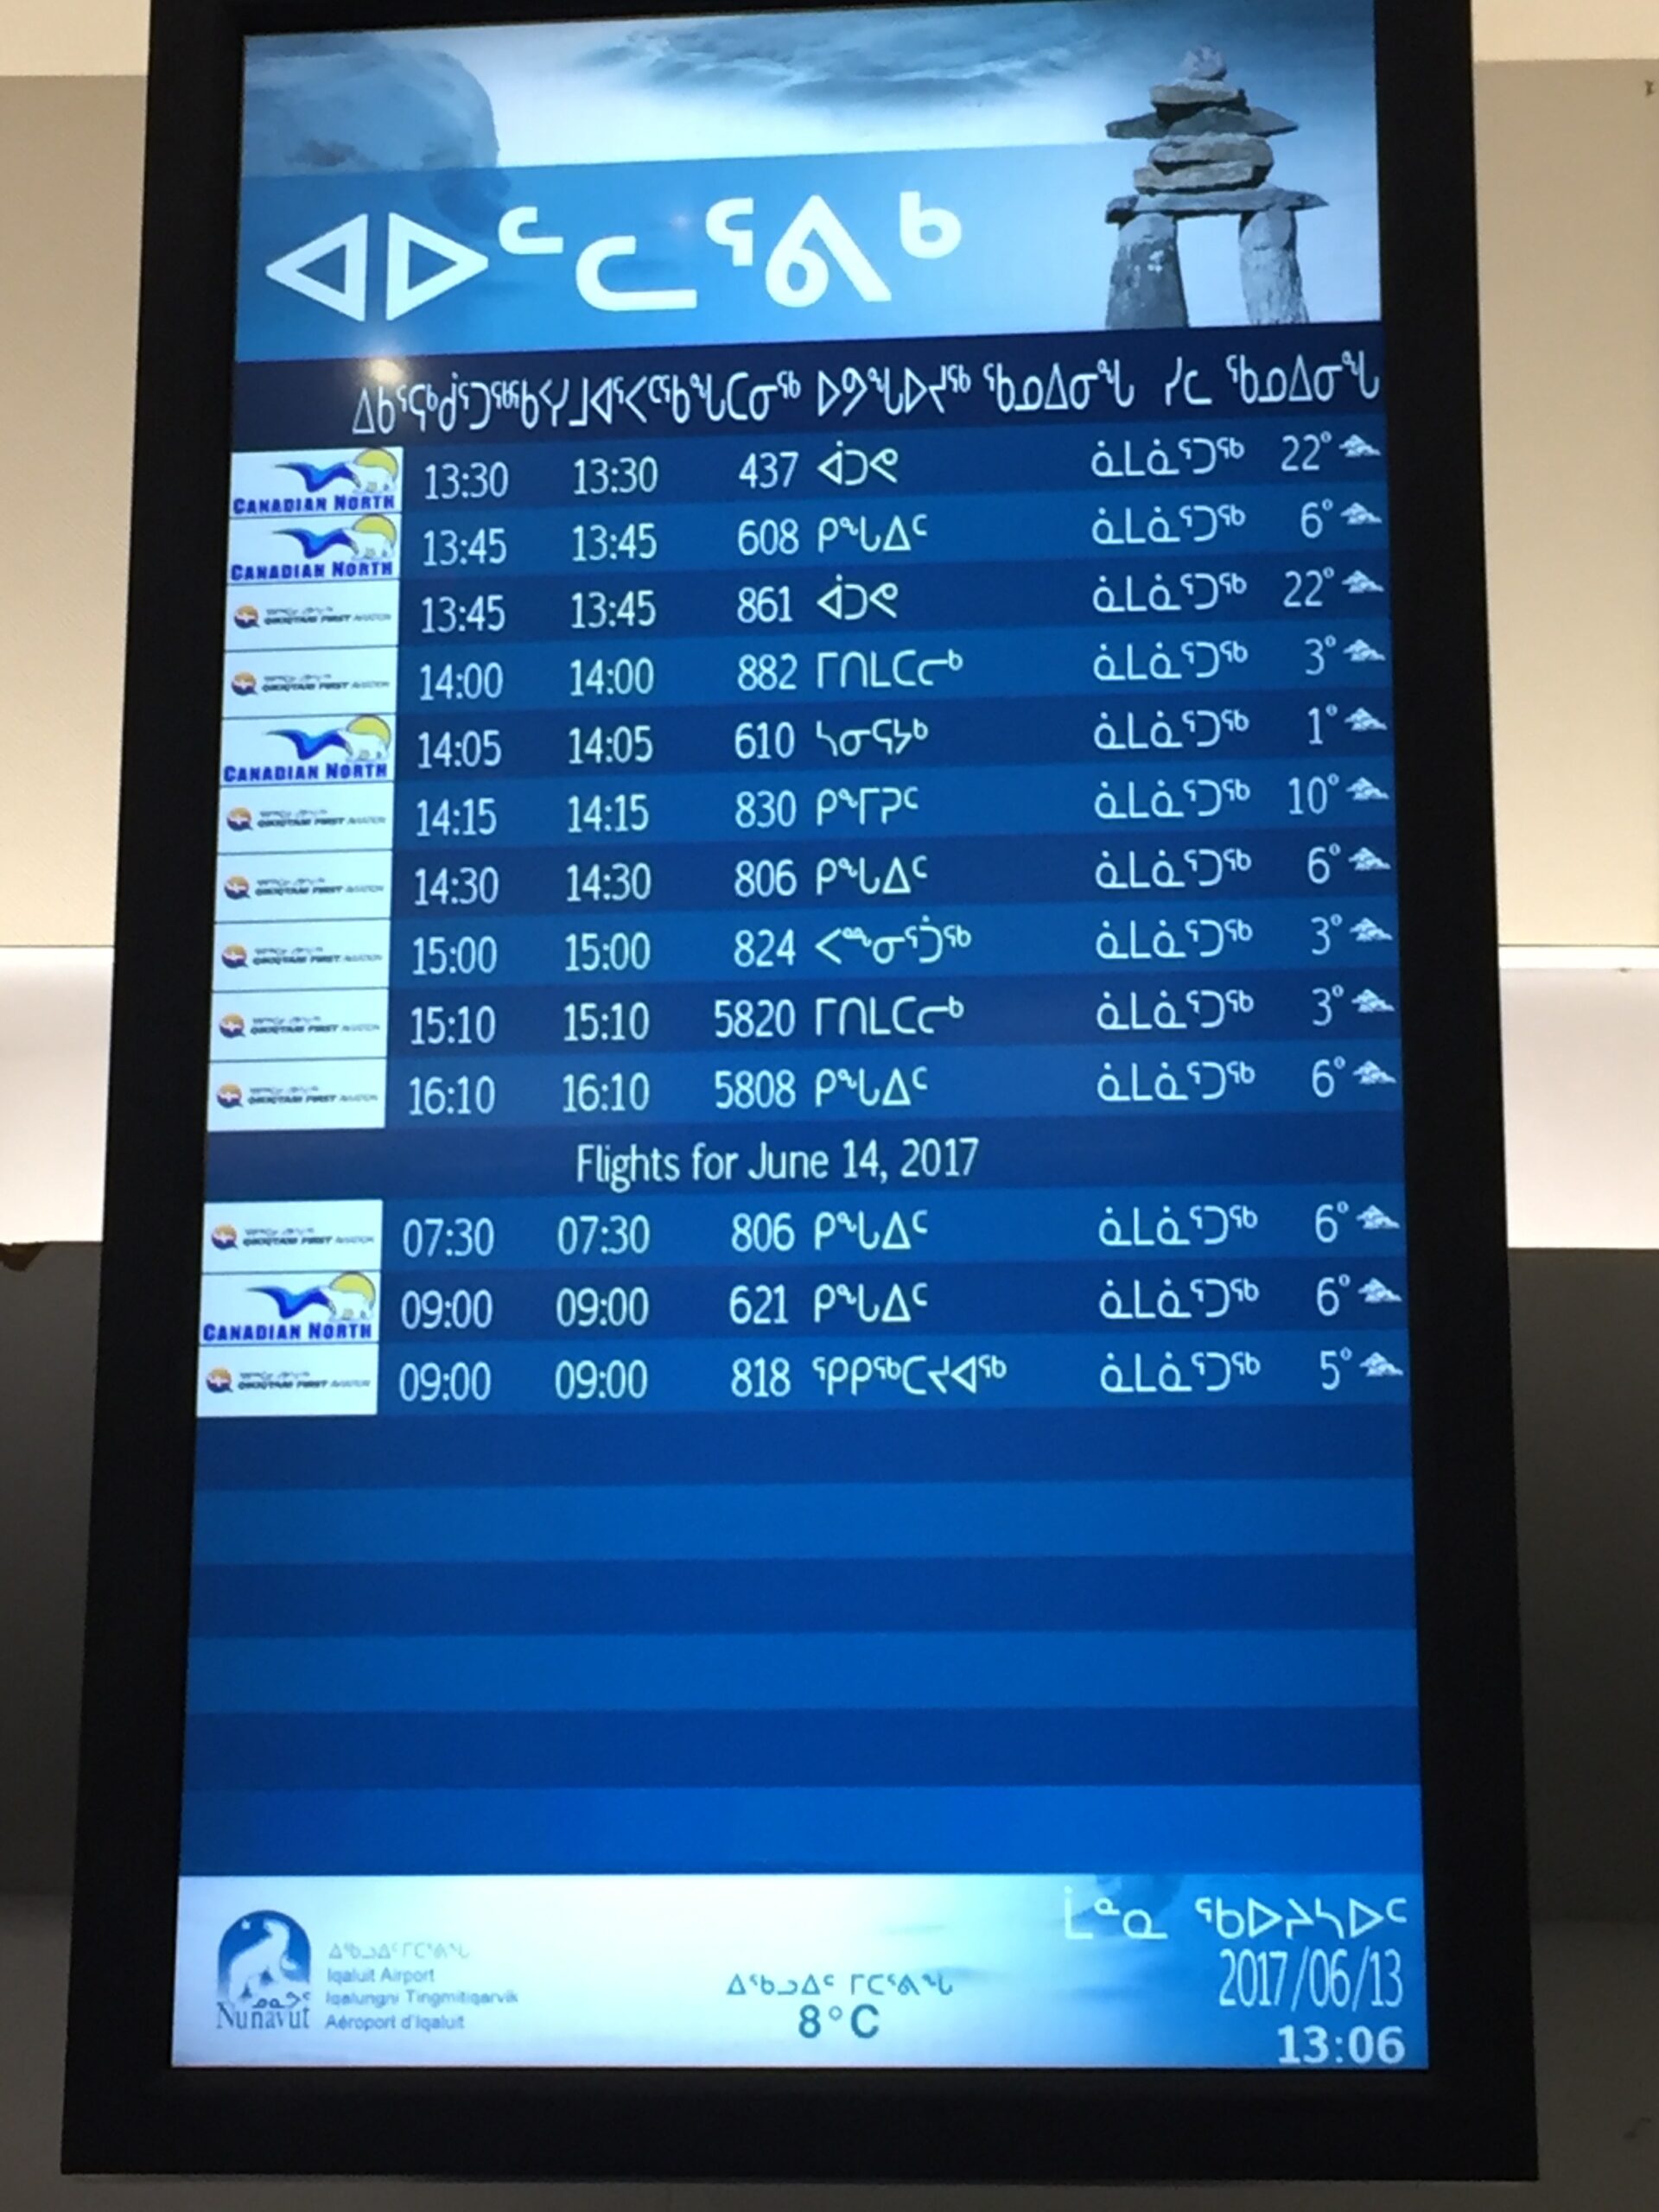 The airport flight listings on a screen in Iqaluit Airport in Nunavut Canada. The text is in Inuktitut.